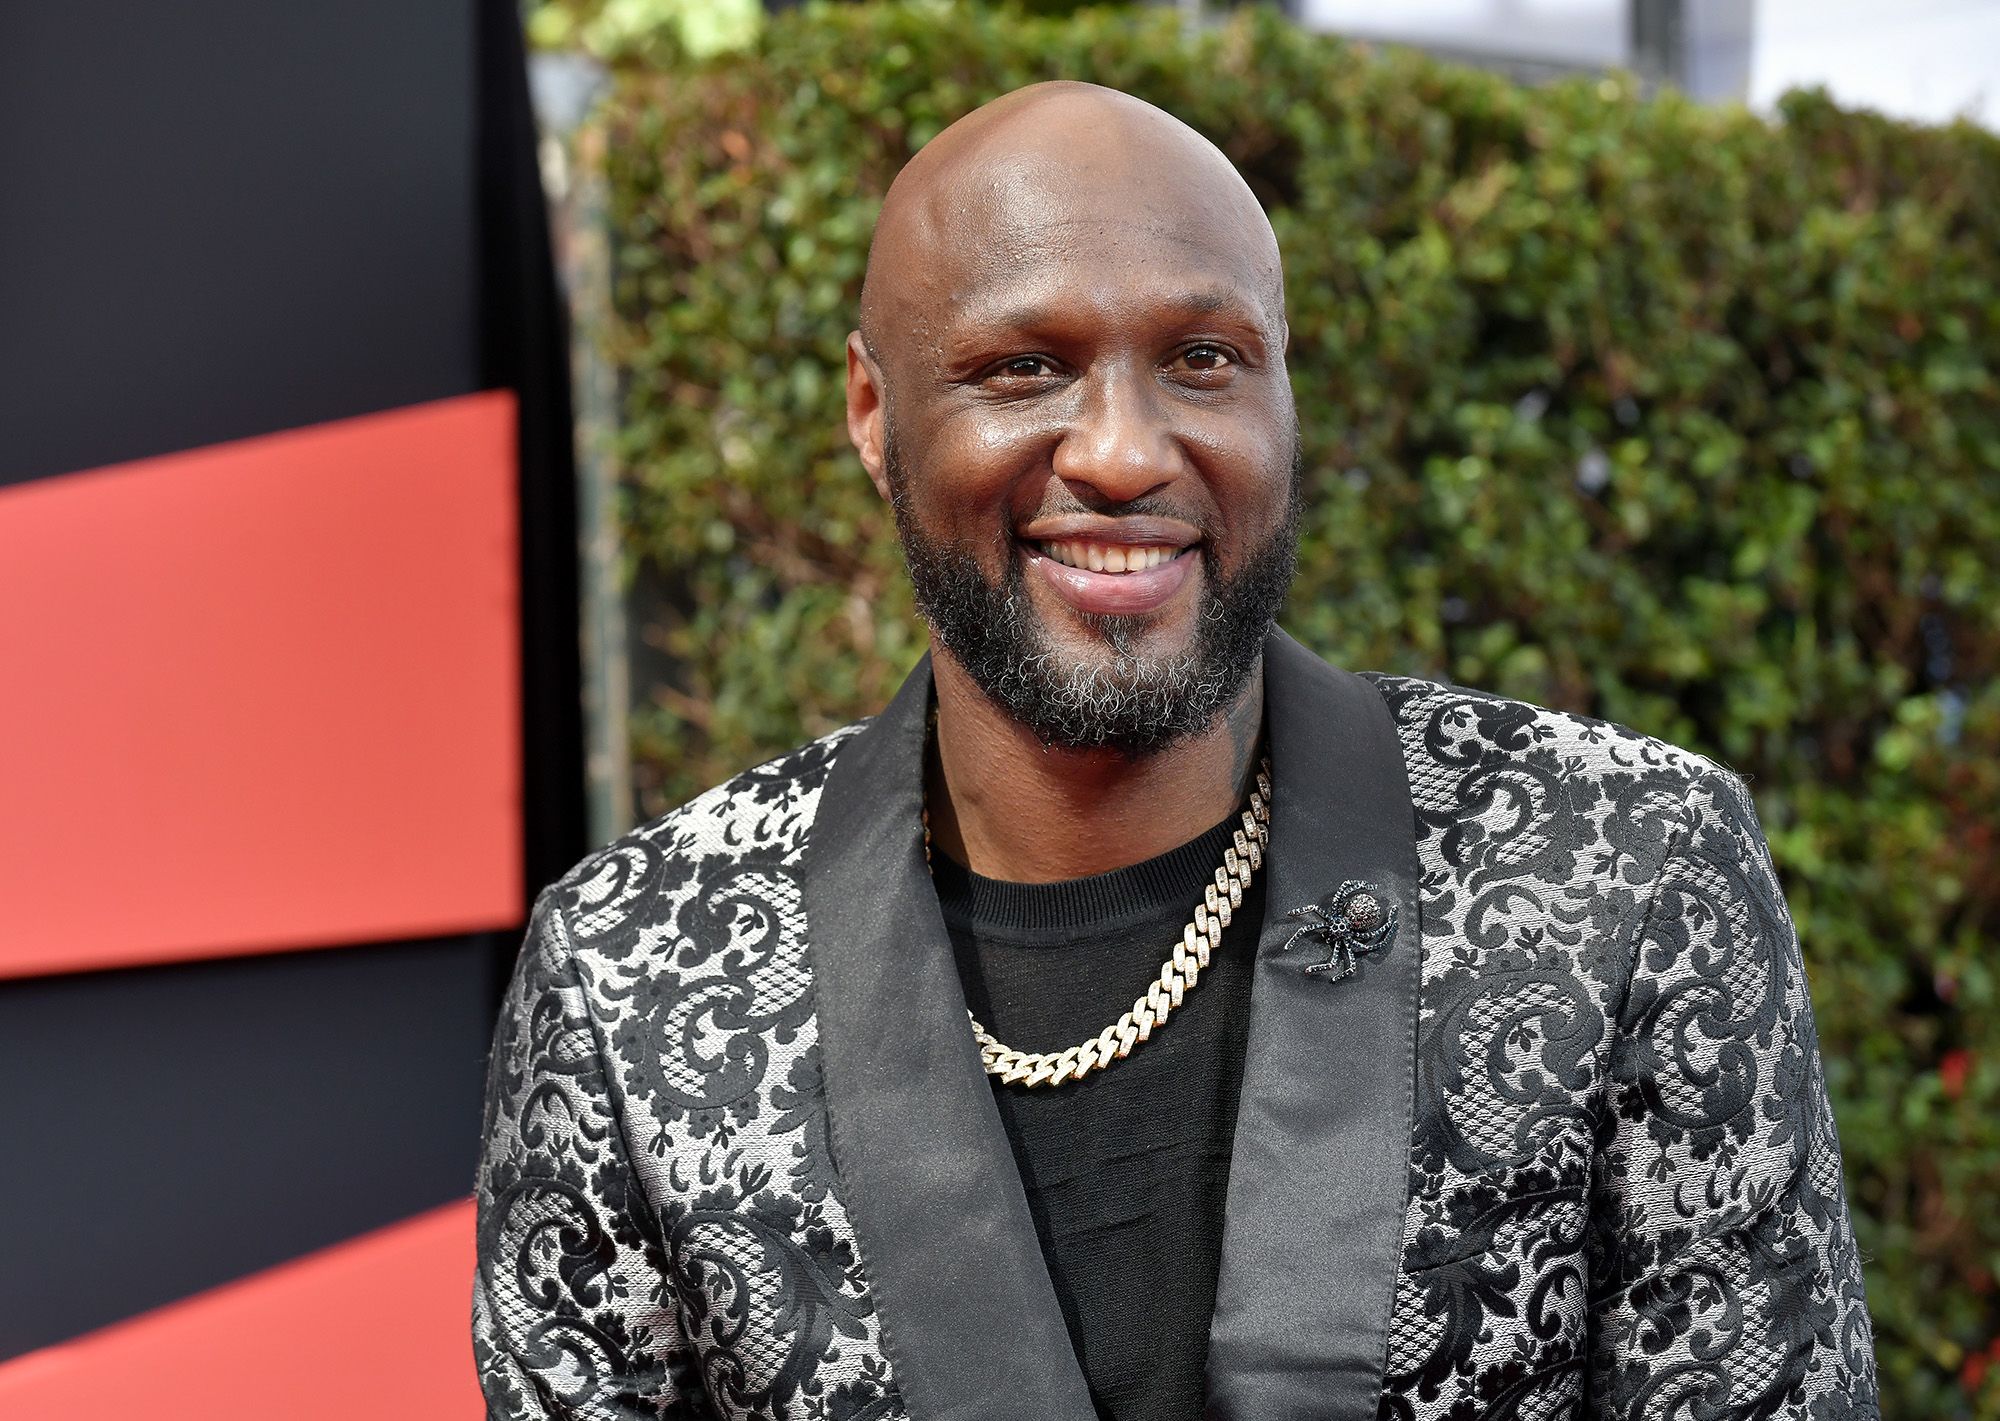 Lamar Odom Takes Over New Mexico Rehab Center To Aid Drug Crisis